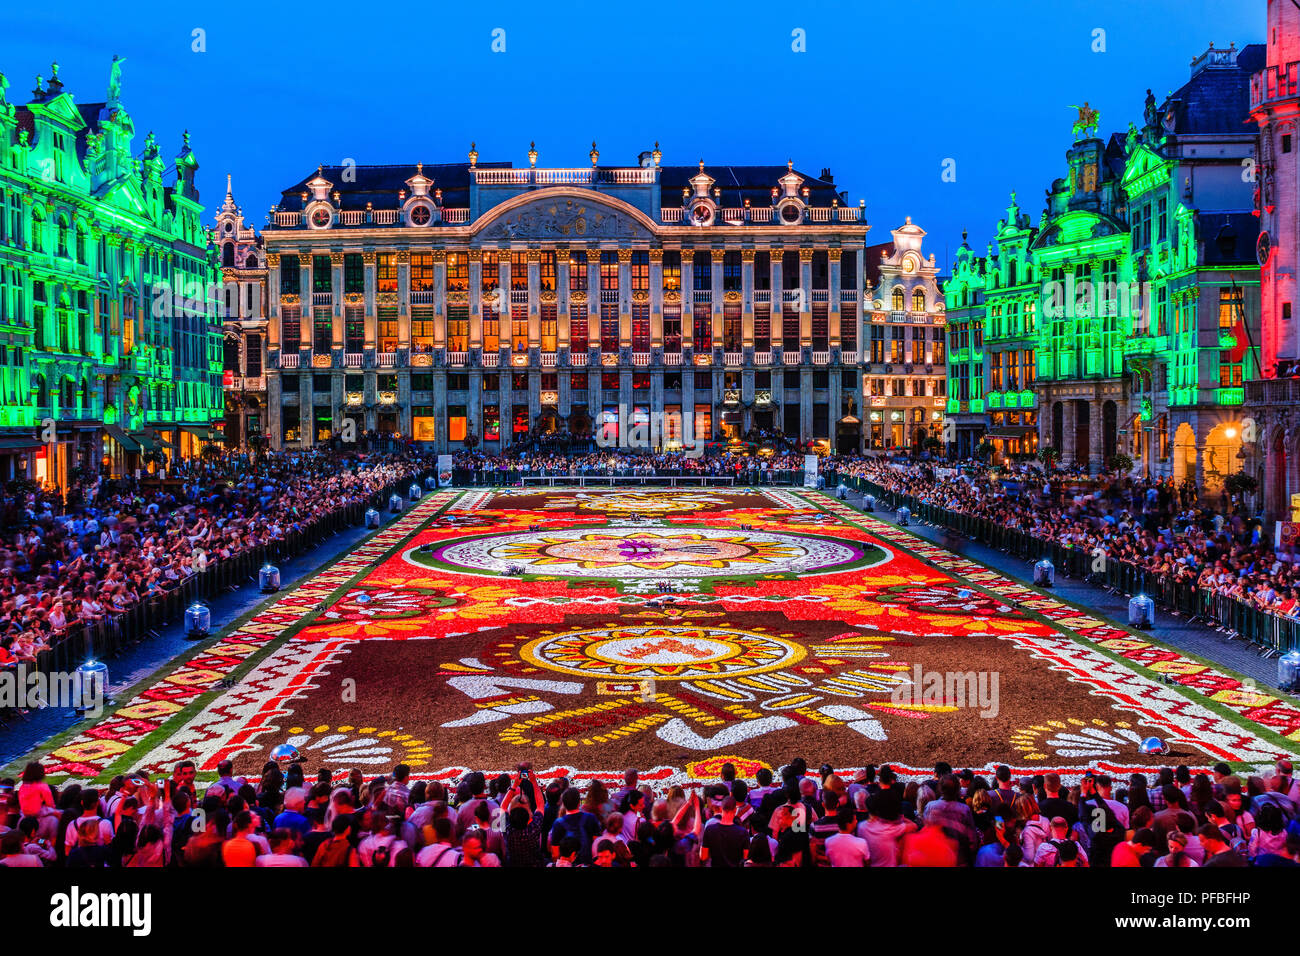 Brussels, Belgium  - August 16, 2018: Grand Place at night during Flower Carpet Festival. Stock Photo